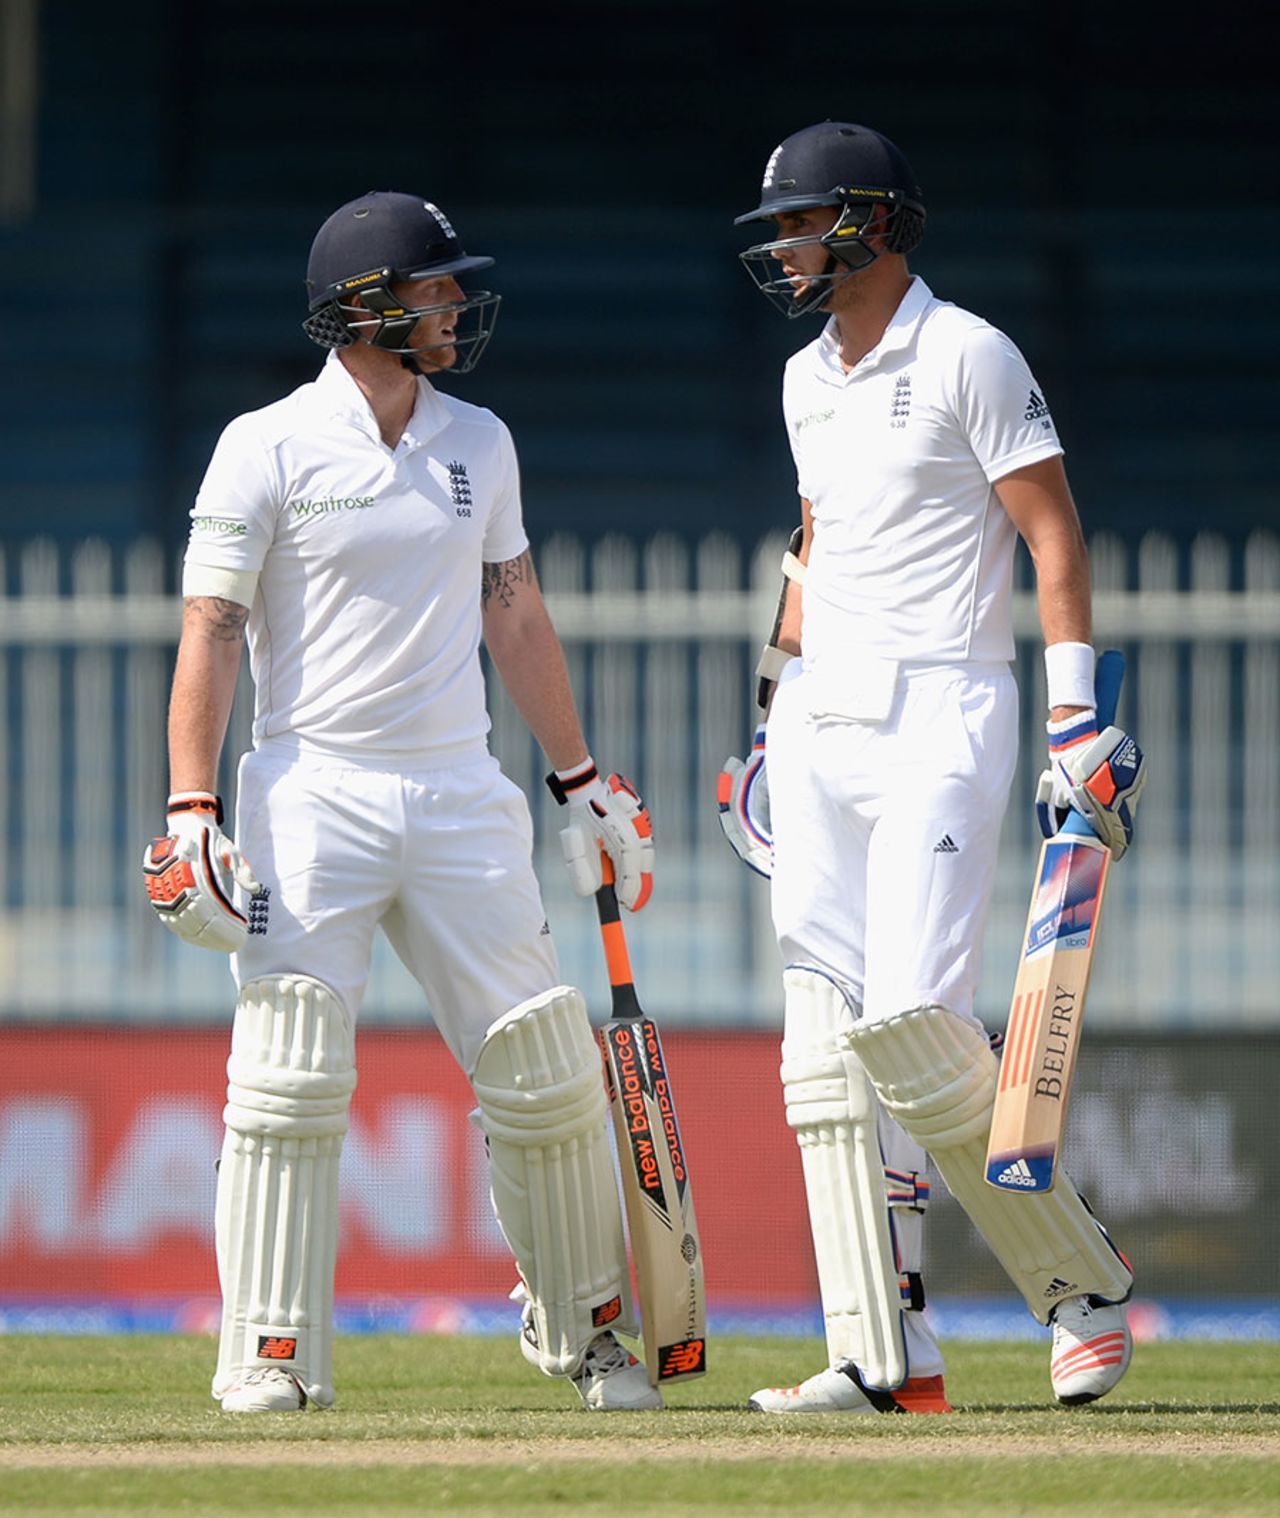 Ben Stokes and Stuart Broad added 10 runs for the tenth wicket, Pakistan v England, 3rd Test, Sharjah, 3rd day, November 3, 2015